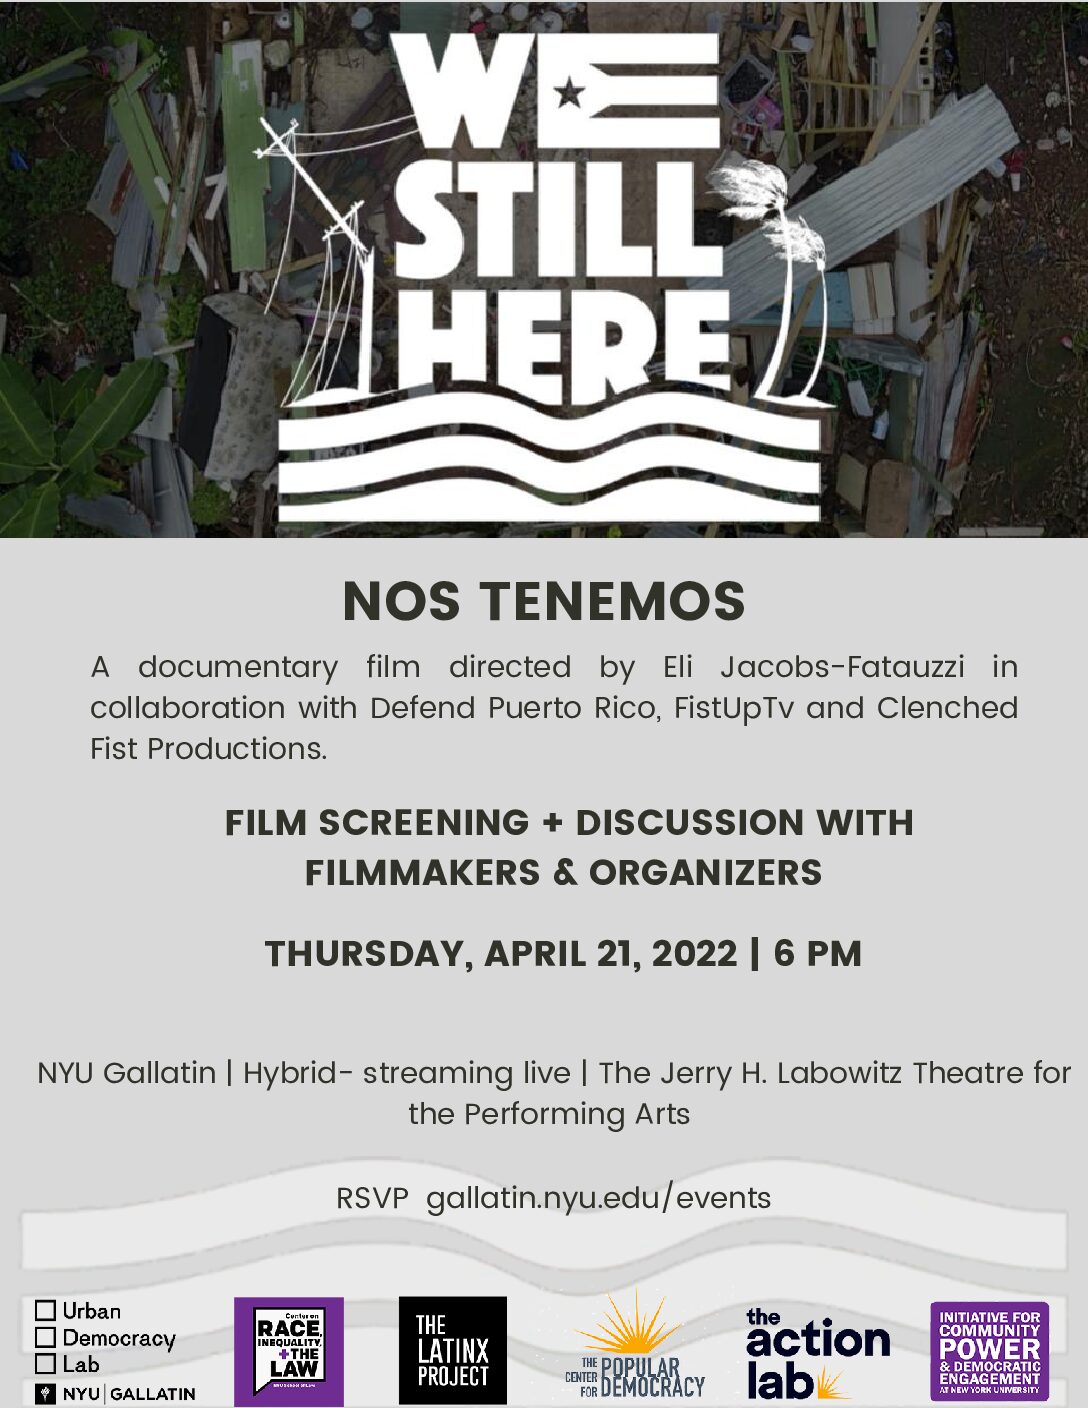 WE STILL HERE: FILM SCREENING AND DISCUSSION